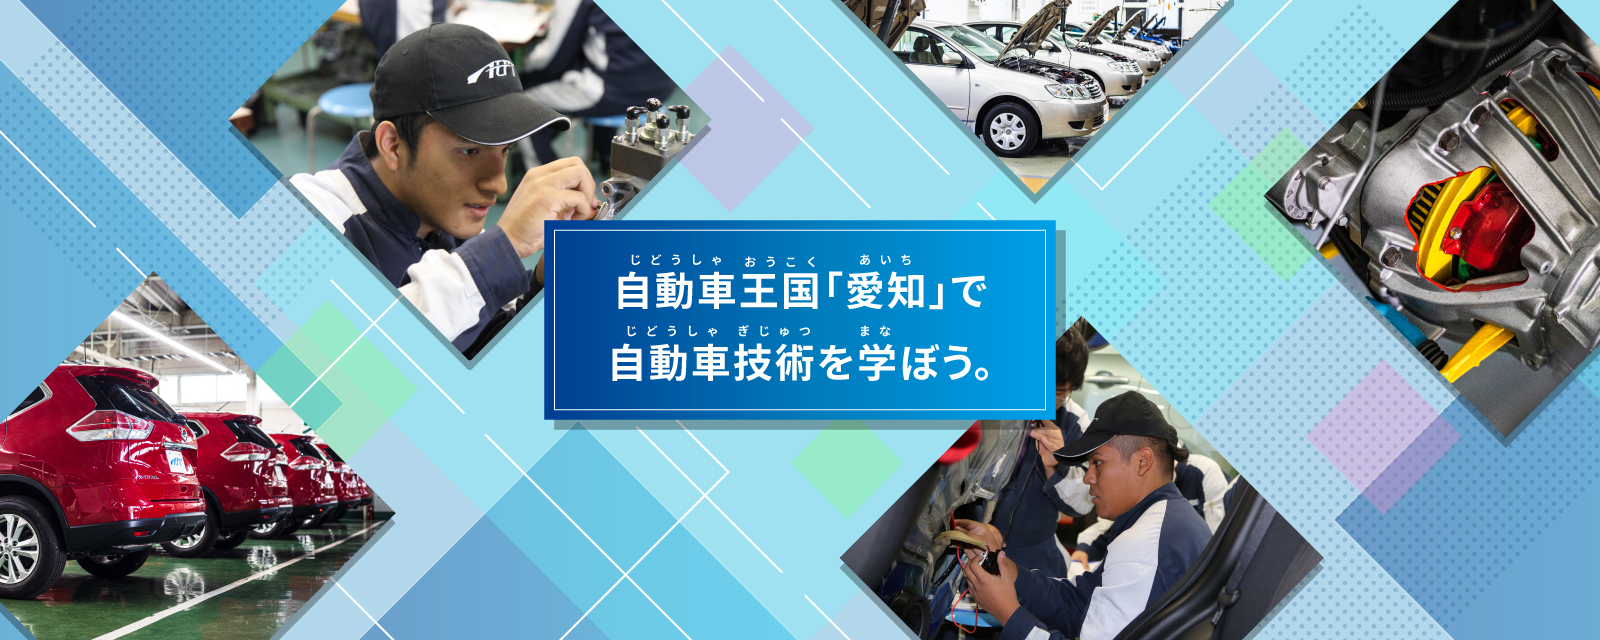 Let's study automobile technology in Aichi, the automobile kingdom.